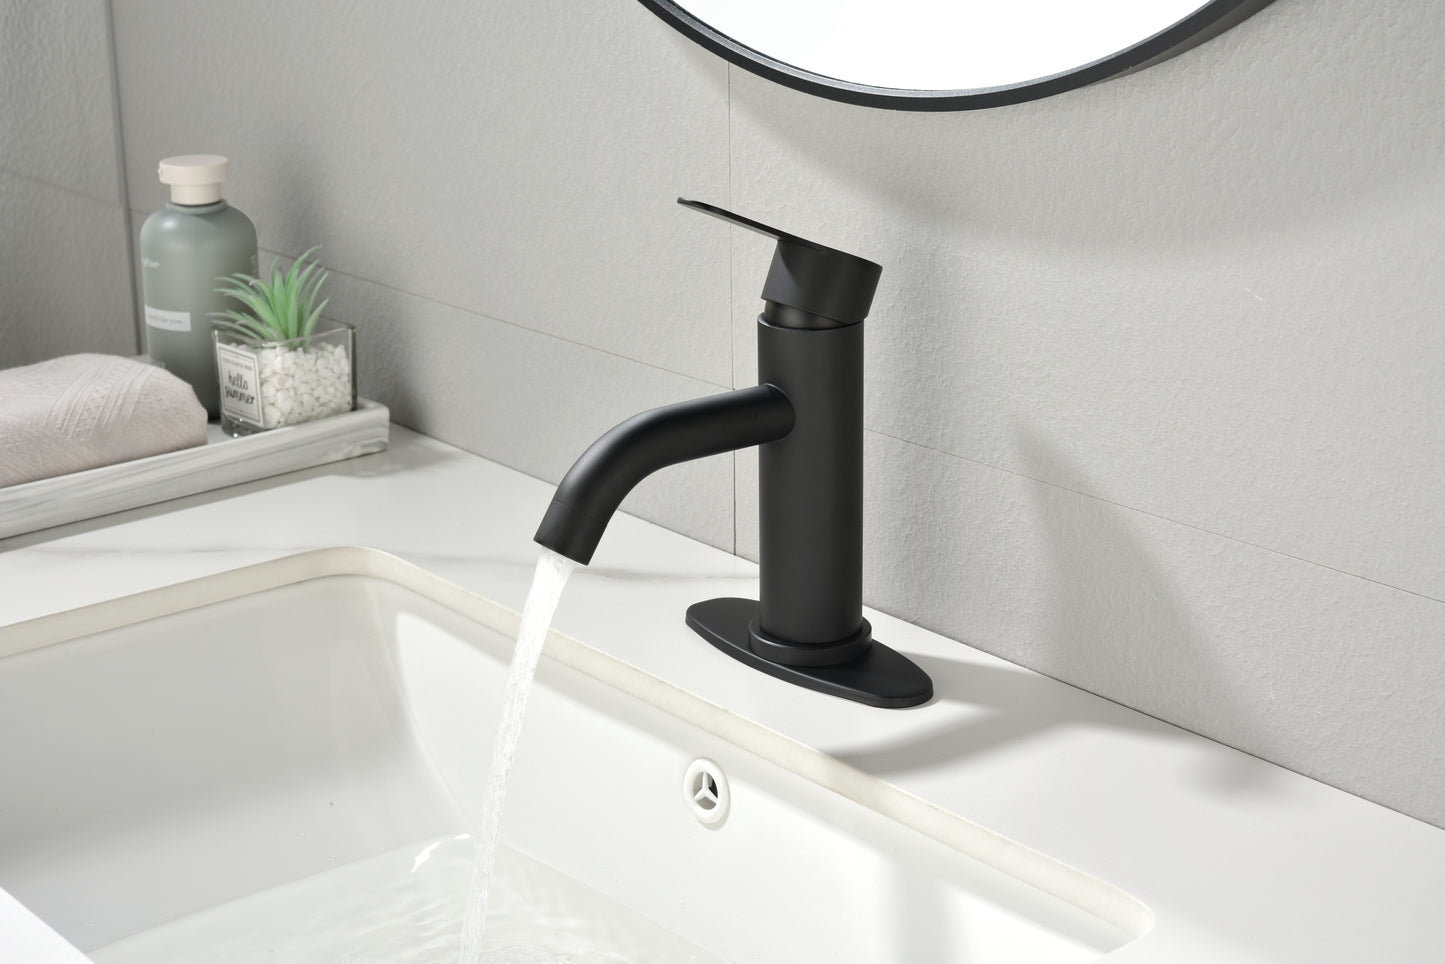 Modern Matte Black Waterfall Spout Bathroom Faucet with Single Lever Control